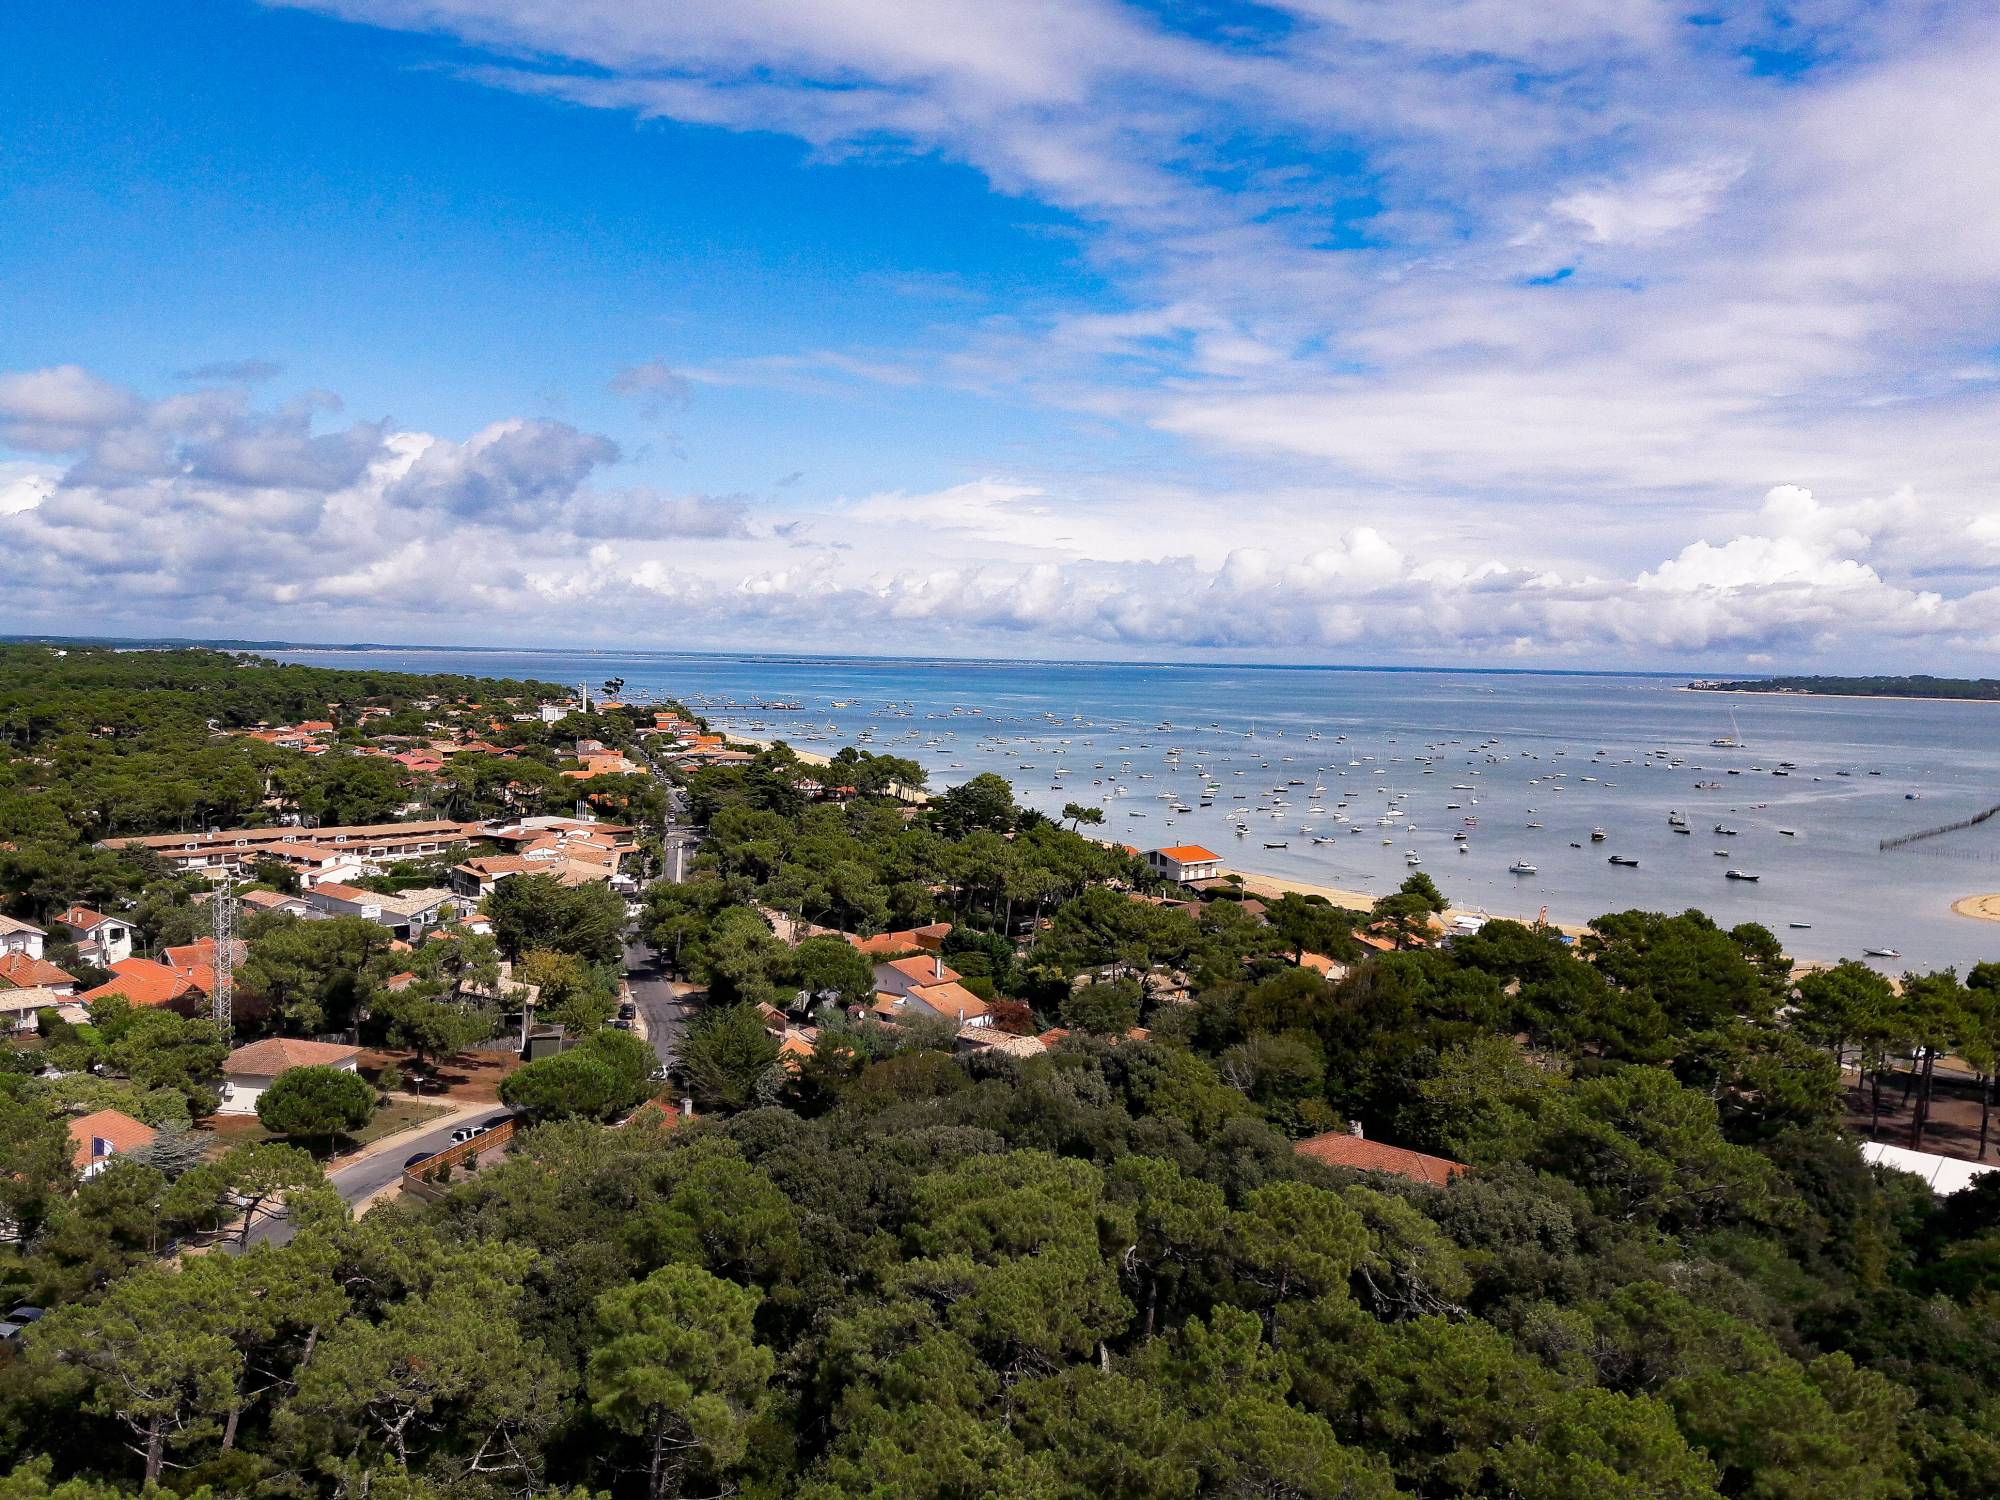 Visit The Cap Ferret, a wild arm of land which borders the Bassin Arcachon 